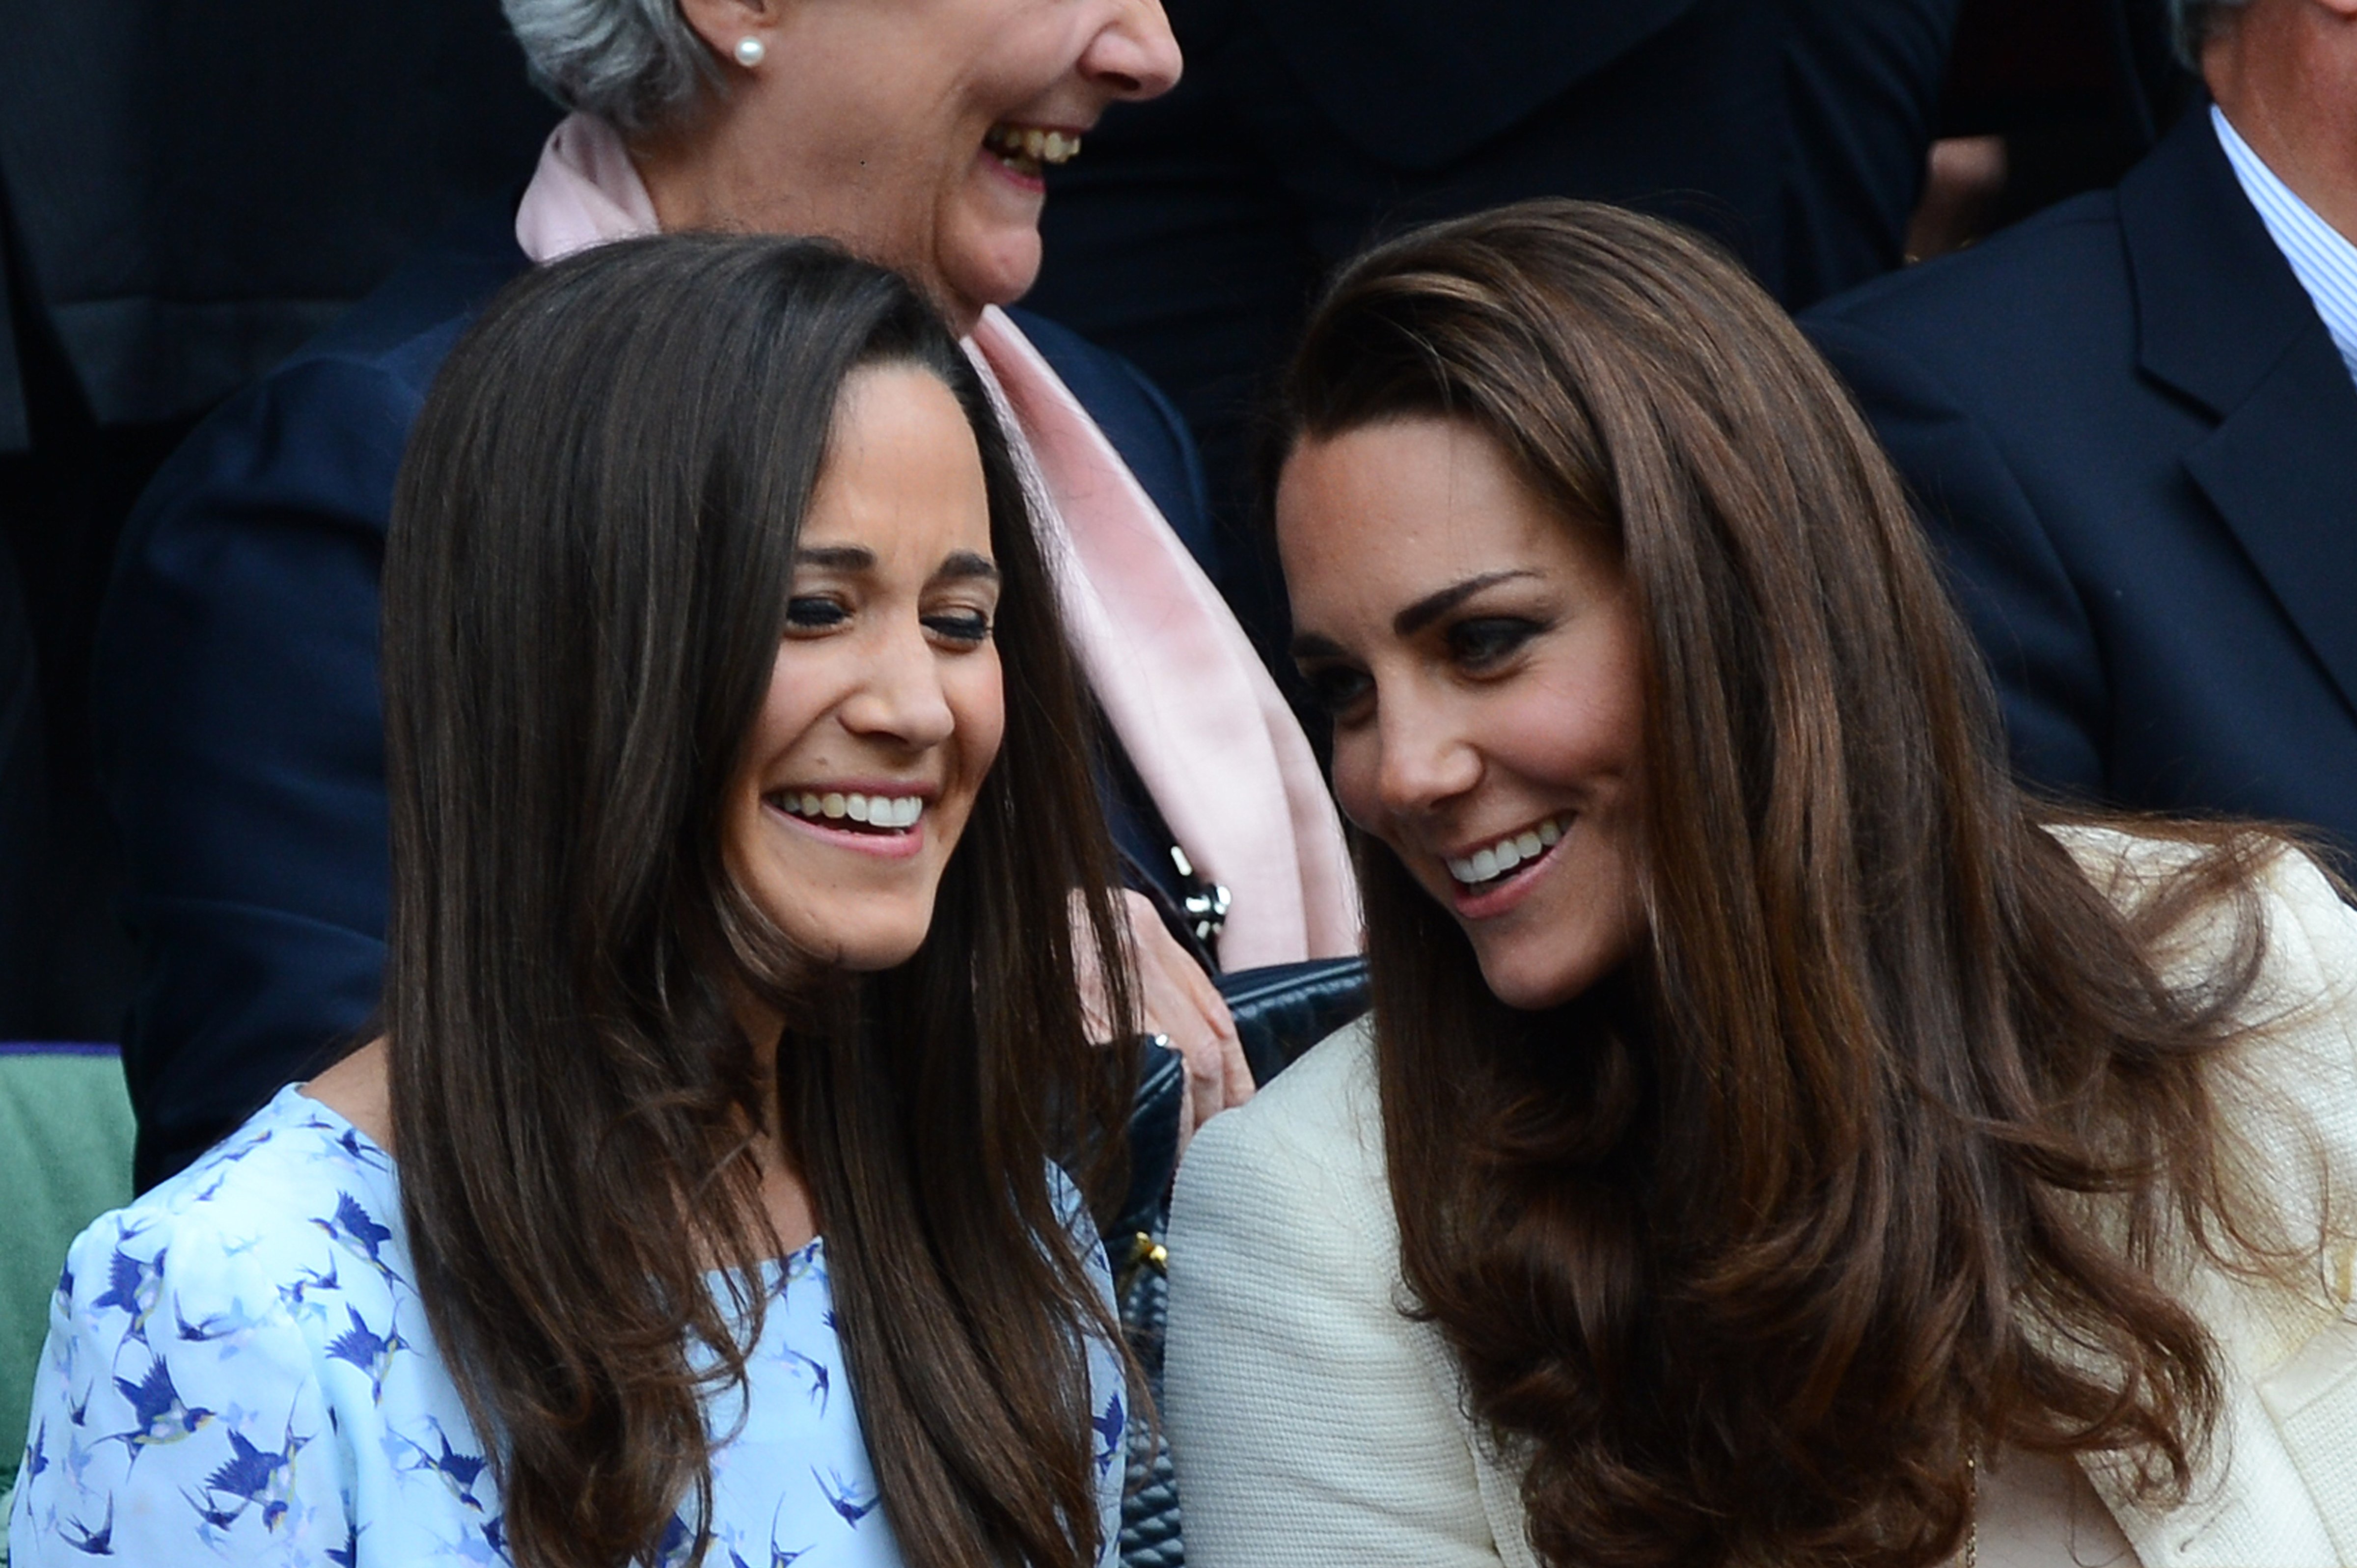 Catherine, Duchess of Cambridge (R) and her sister Pippa Middleton (L) talk in the Royal Box before the men's singles final match between Britain's Andy Murray and Switzerland's Roger Federer on Centre Court on day 13 of the 2012 Wimbledon Championships tennis tournament at the All England Tennis Club in Wimbledon, southwest London, on July 8, 2012. (LEON NEAL—AFP/Getty Images)